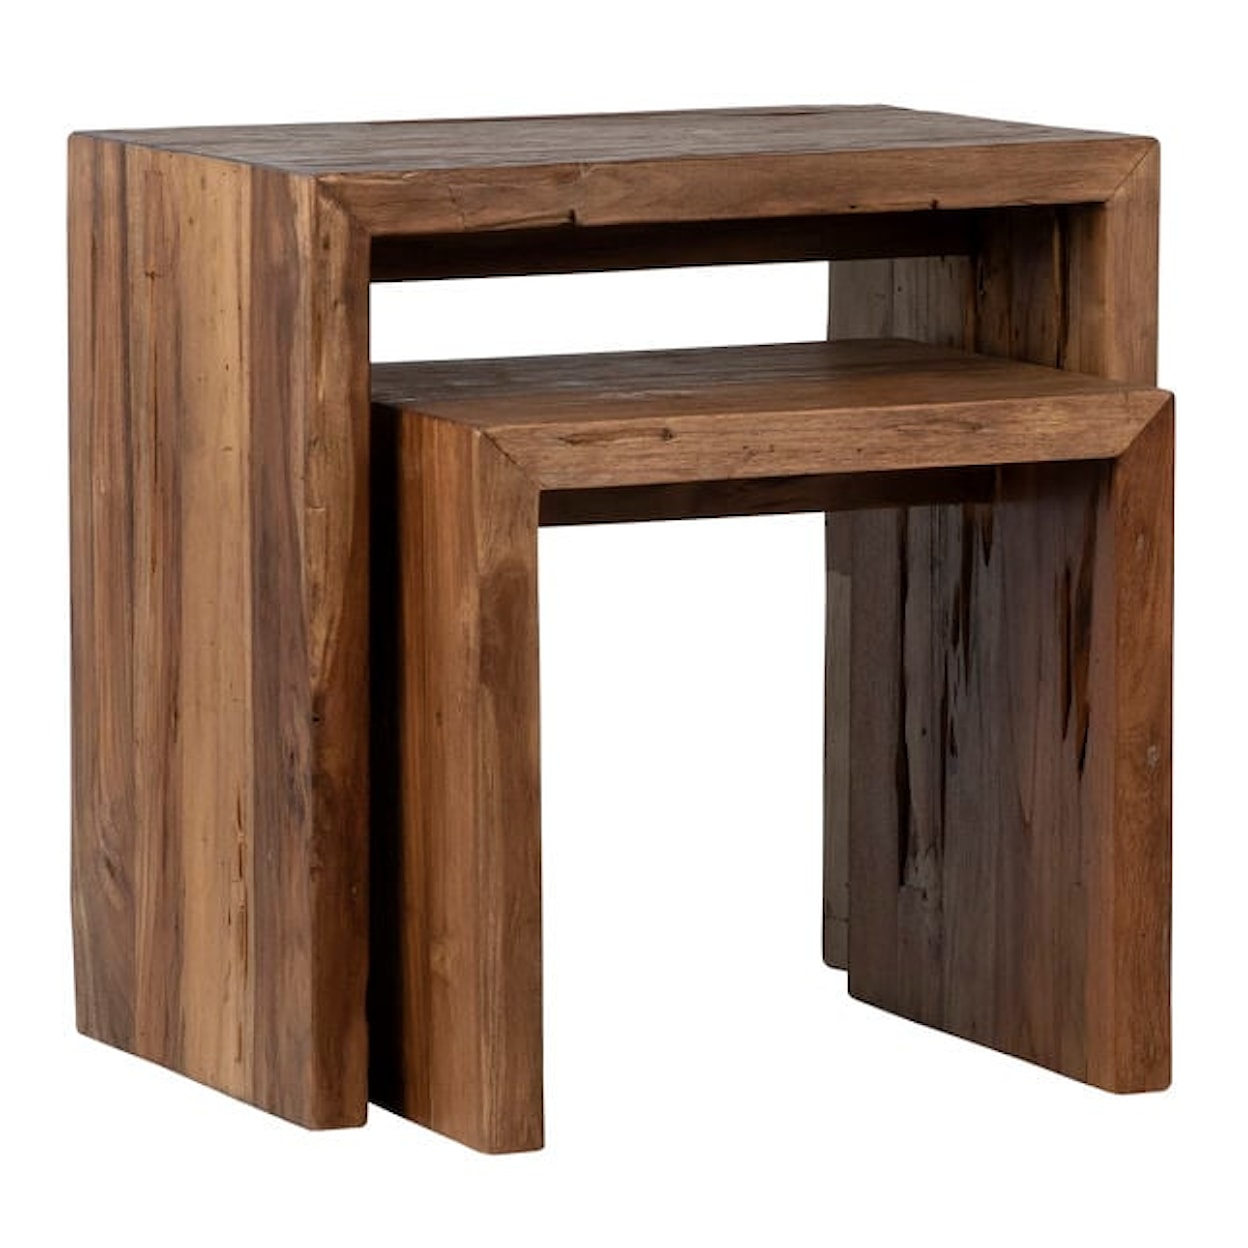 Dovetail Furniture Casegood Accent Chilton Nesting Tables